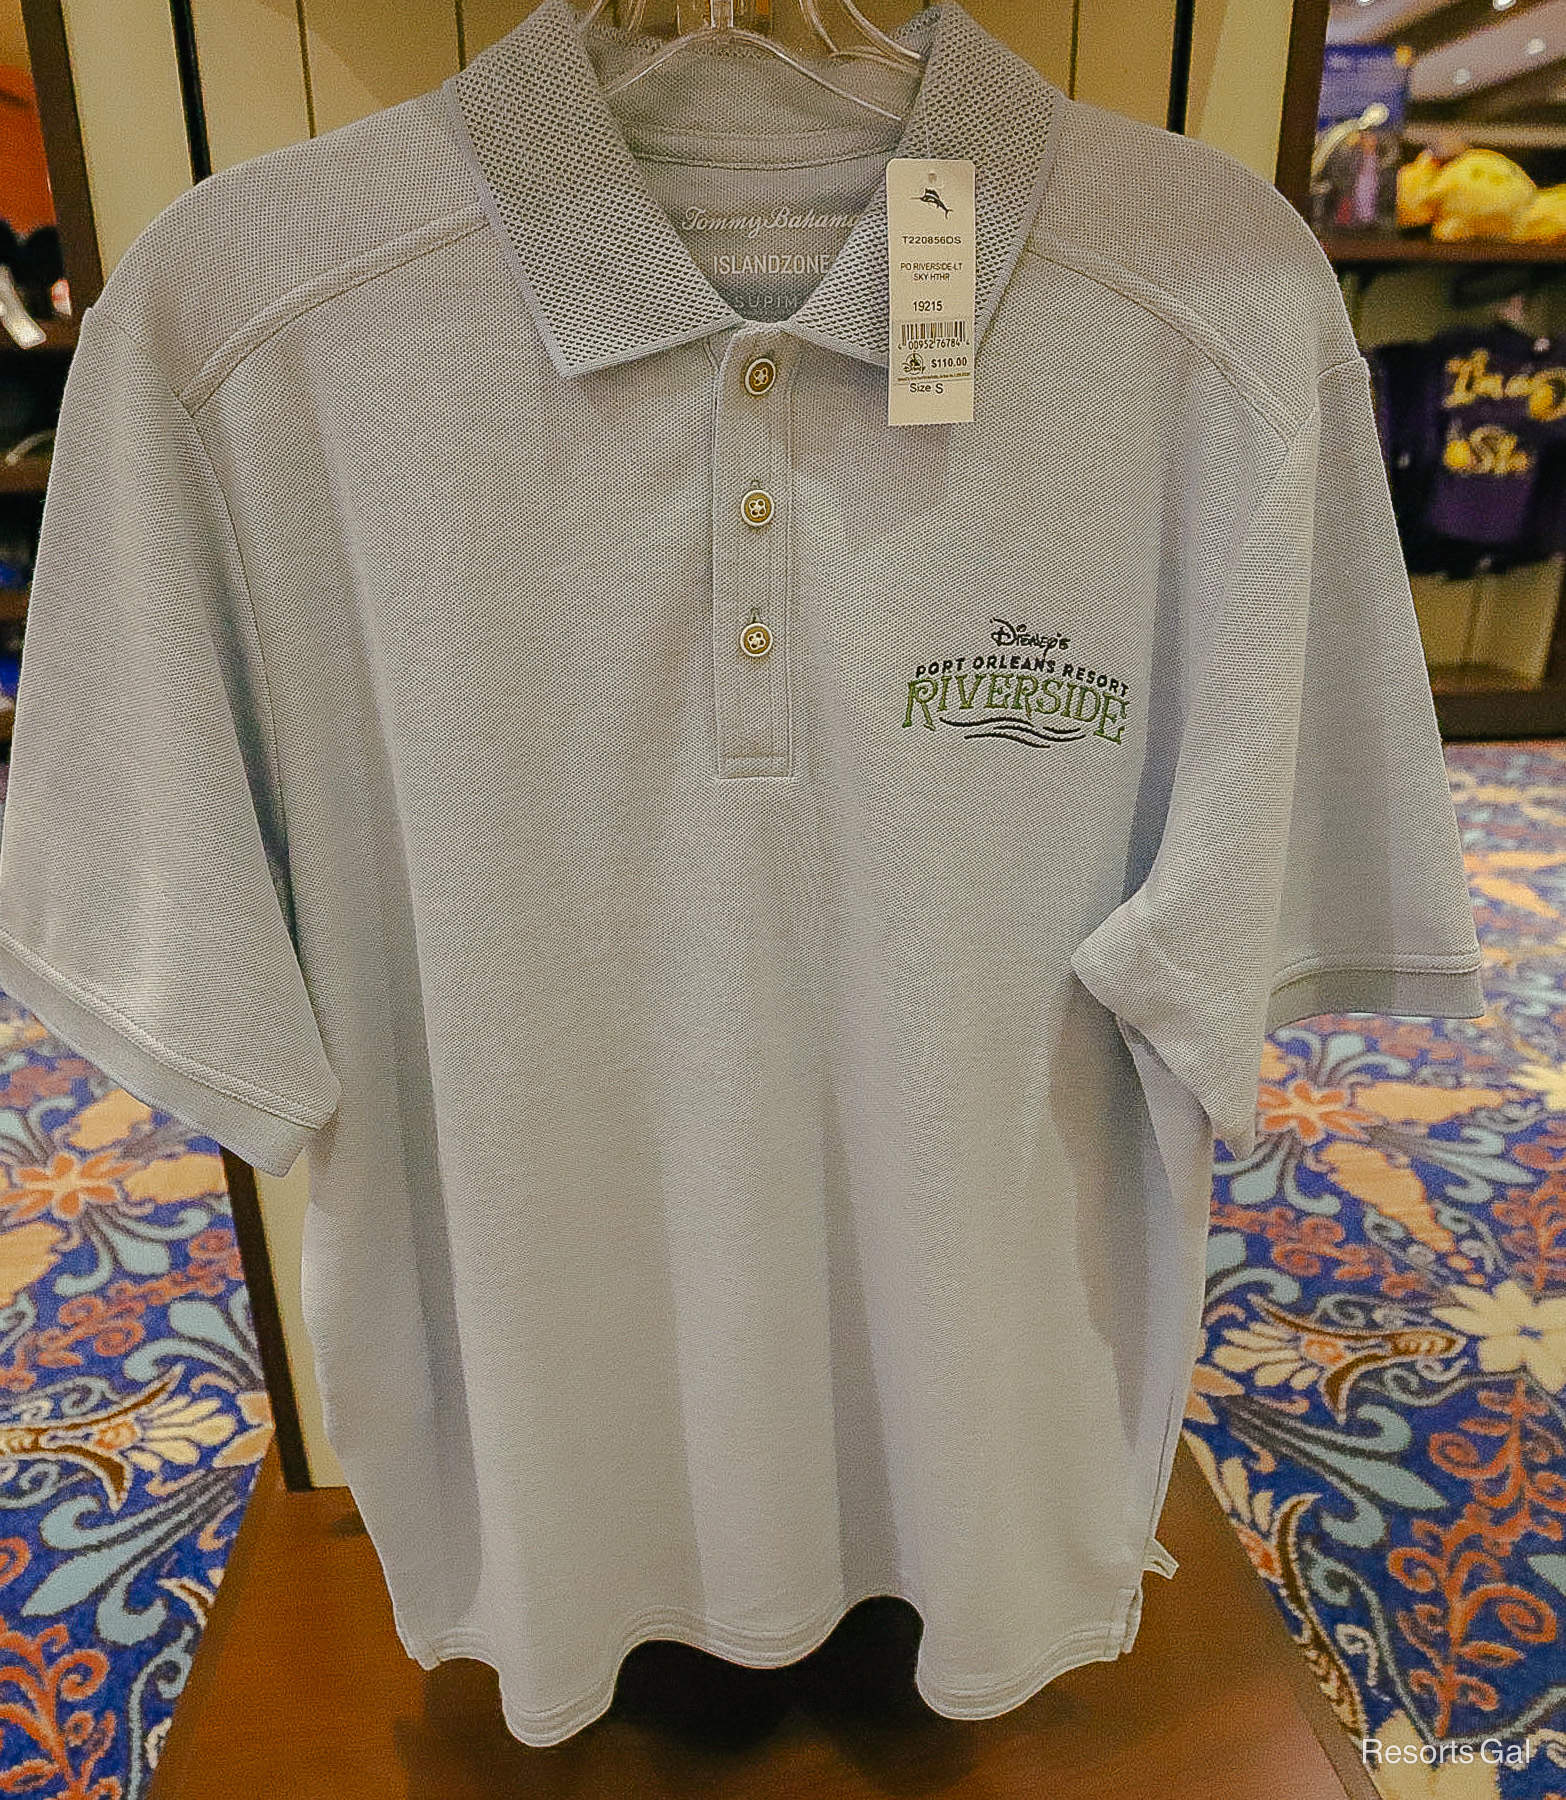 a polo shirt in light blue by Tommy Bahamas with the Port Orleans Riverside logo 